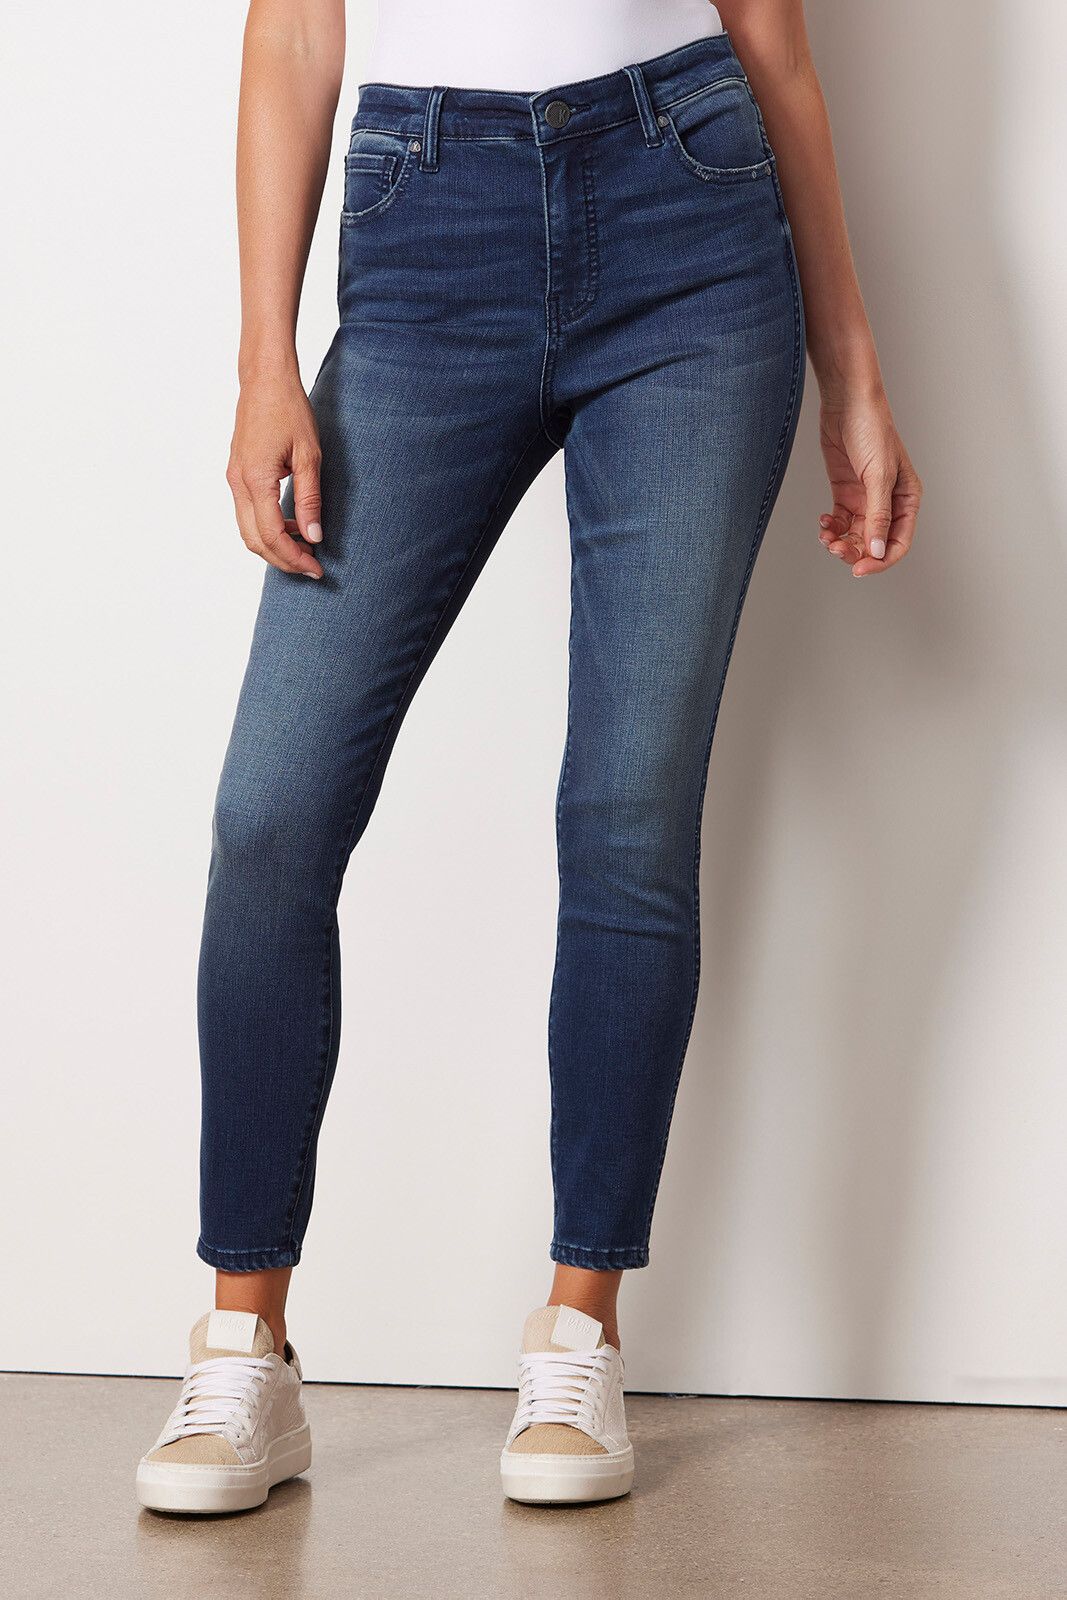 KUT FROM THE KLOTH Connie Ankle Skinny Jean | EVEREVE | Evereve